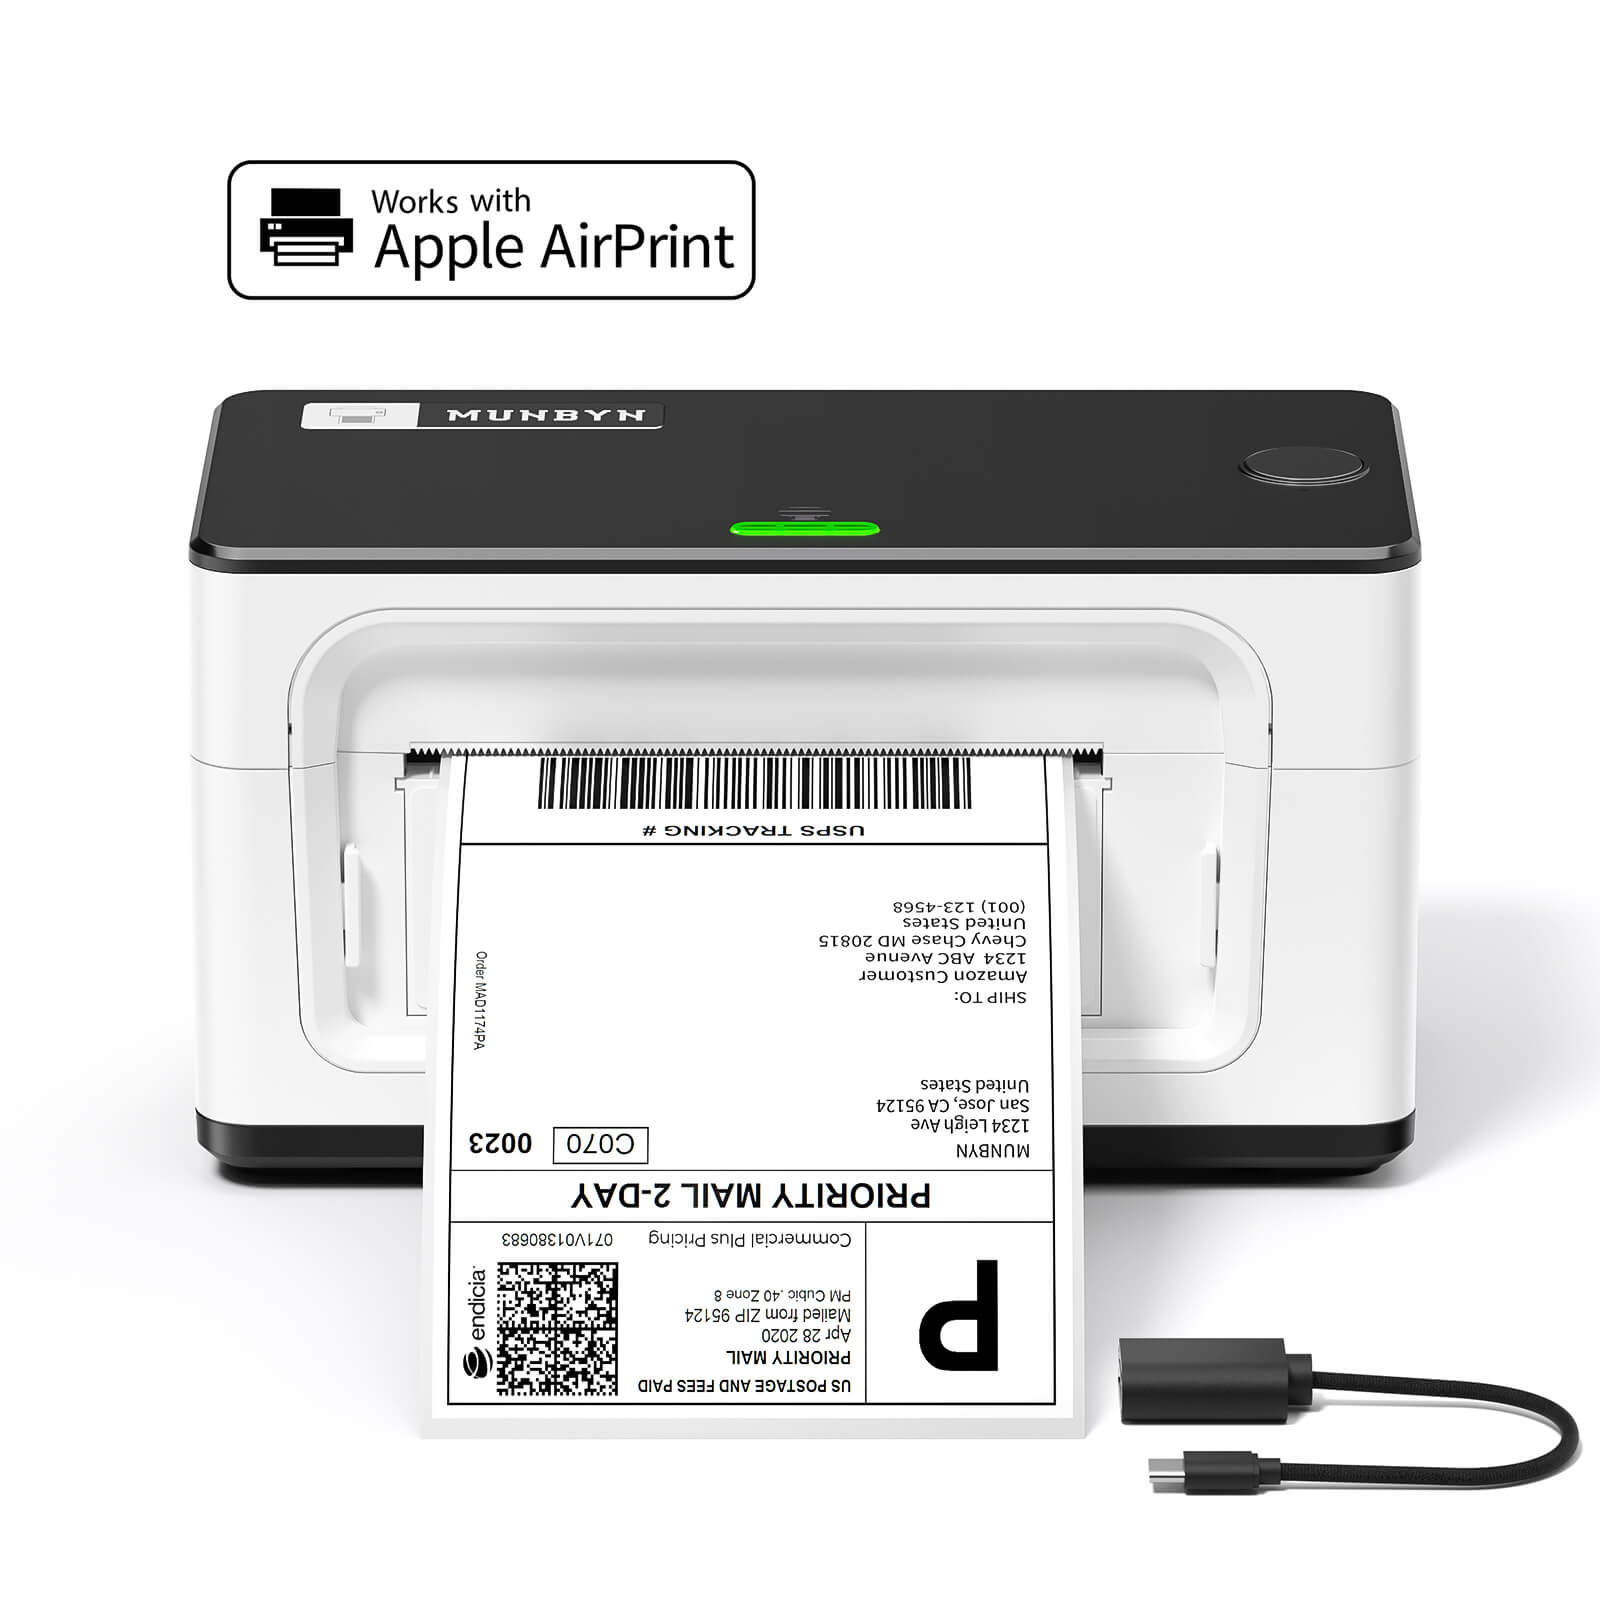 MUNBYN offers the 941AP AirPrint Thermal Label Printer, designed for small businesses, enabling AirPrint printing